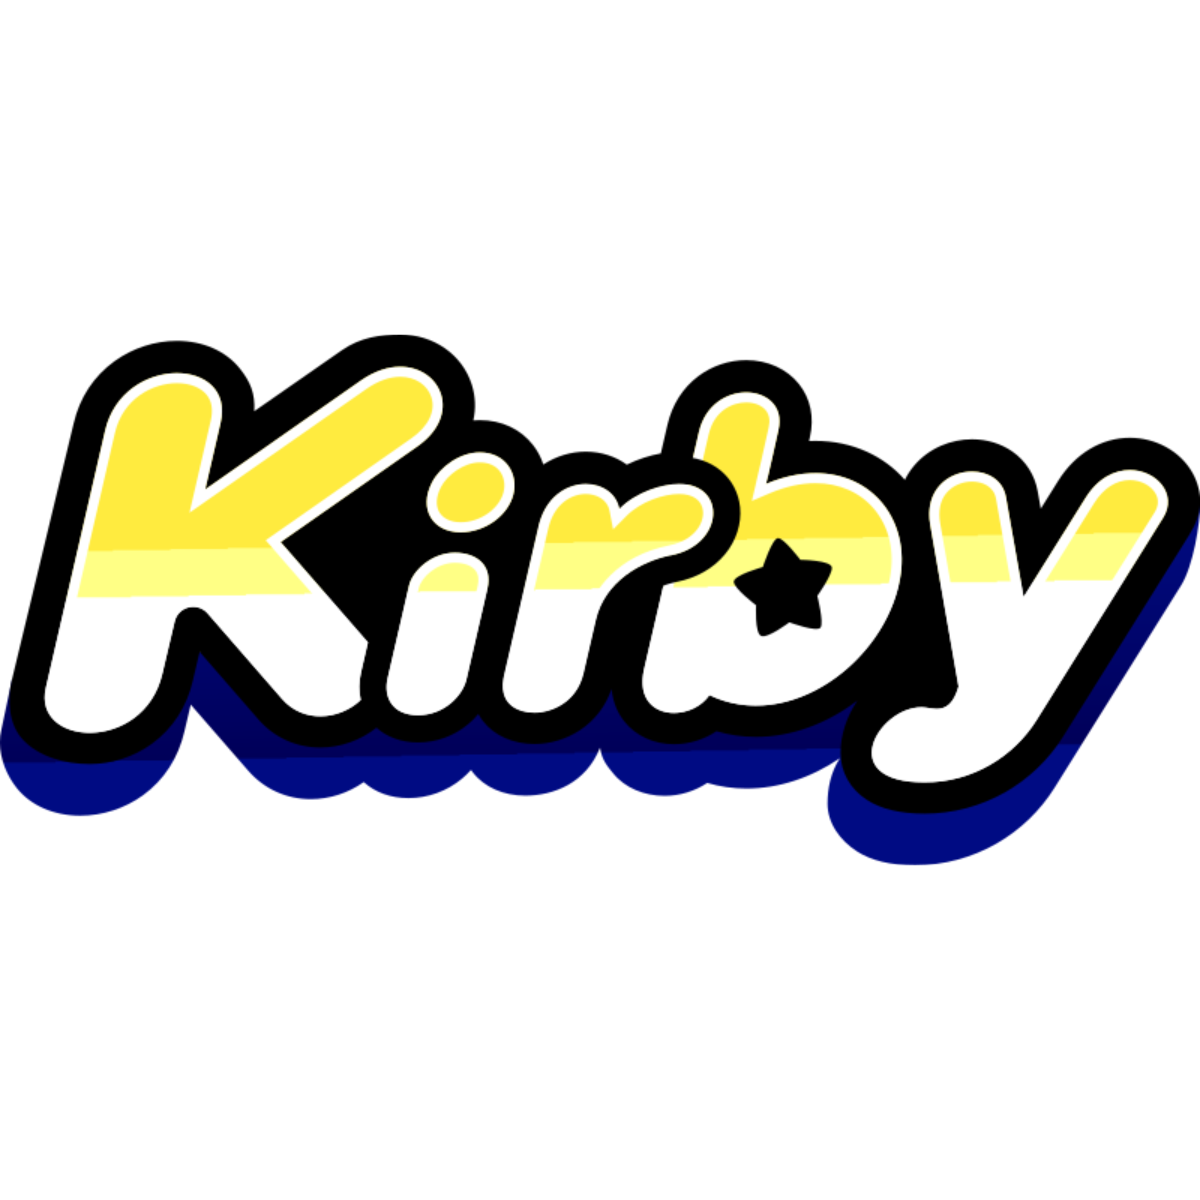 Ensky Character Sleeve - Kirby Horoscope &quot;Good Night Reserve&quot; [EN-1219]-Ensky-Ace Cards &amp; Collectibles